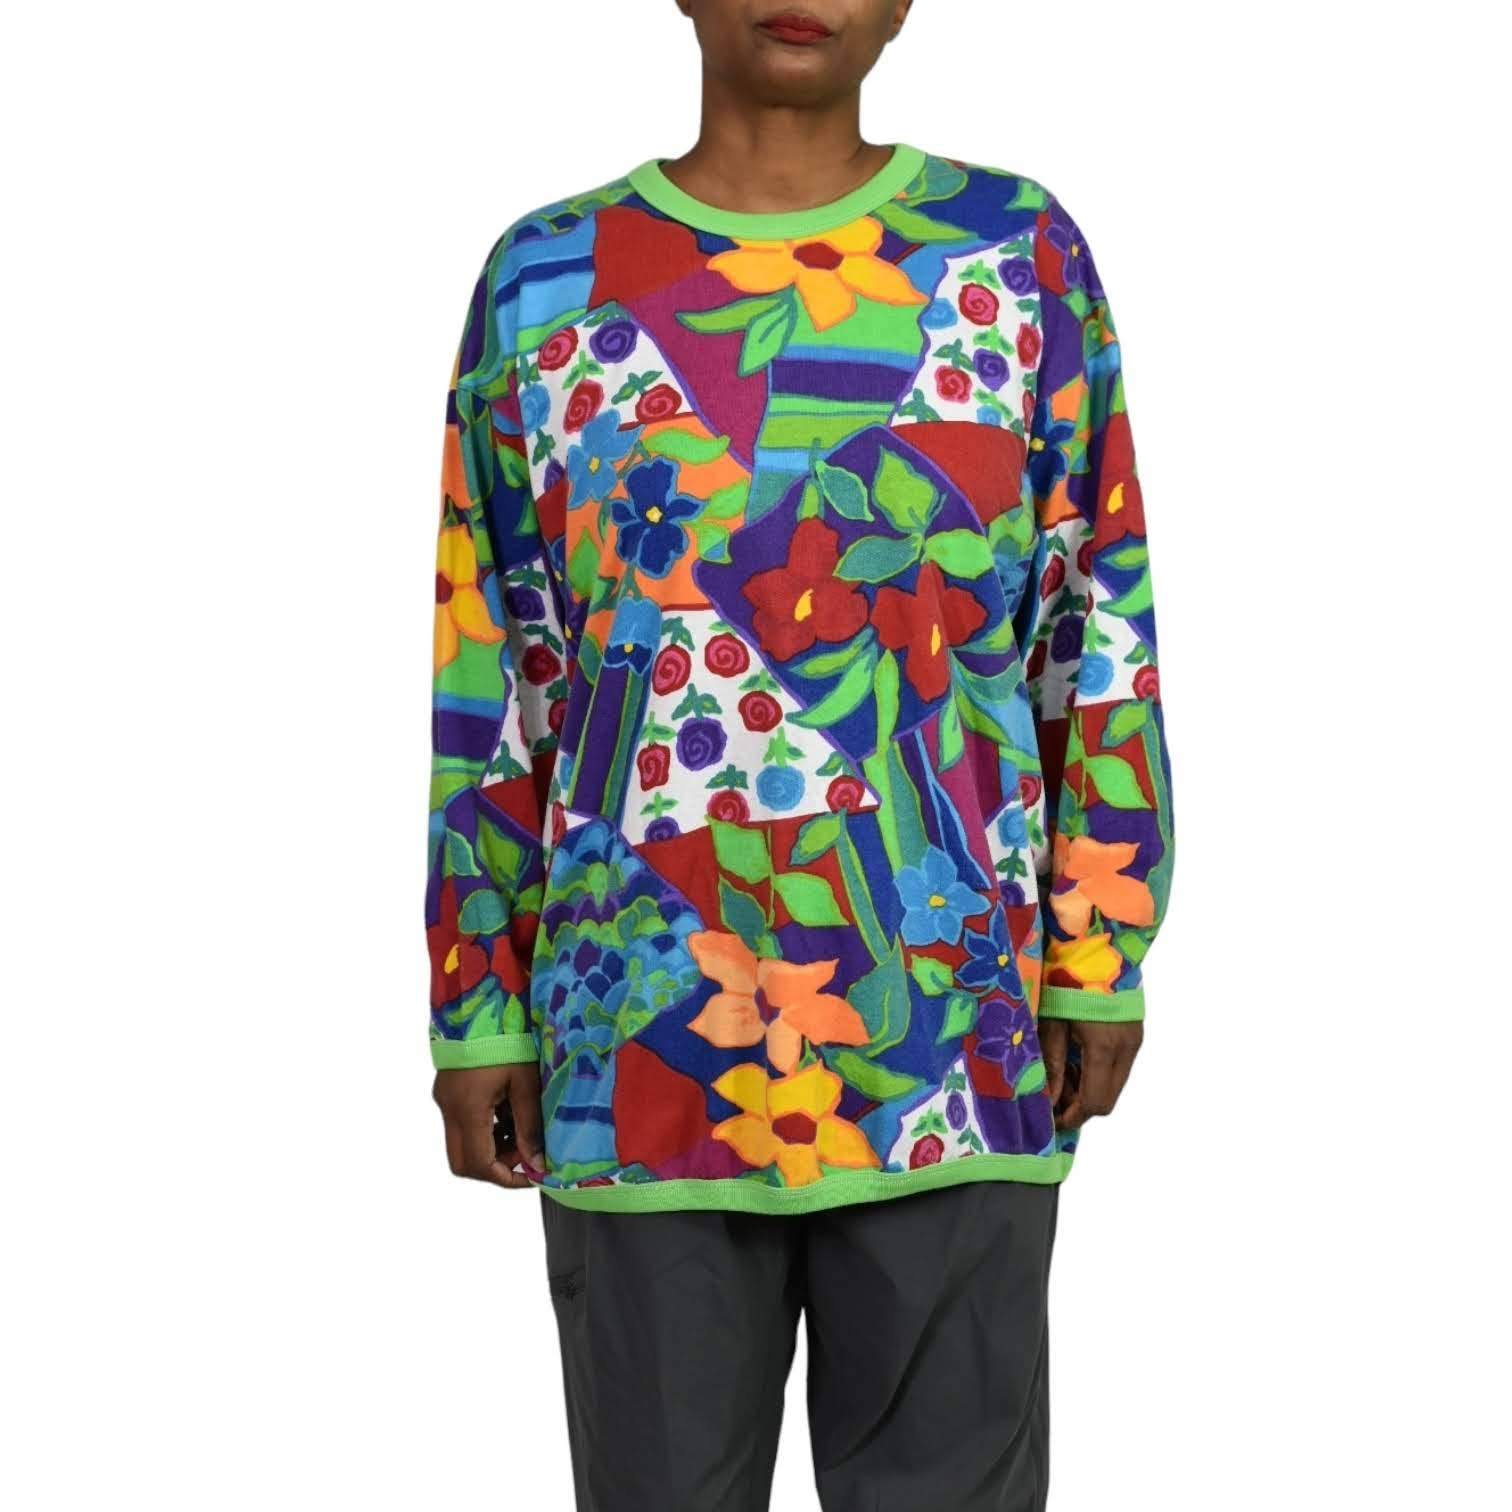 Ugly Sweatshirt Vintage Weird Colorful Green Floral Printed Multicolor Plus Size 1X